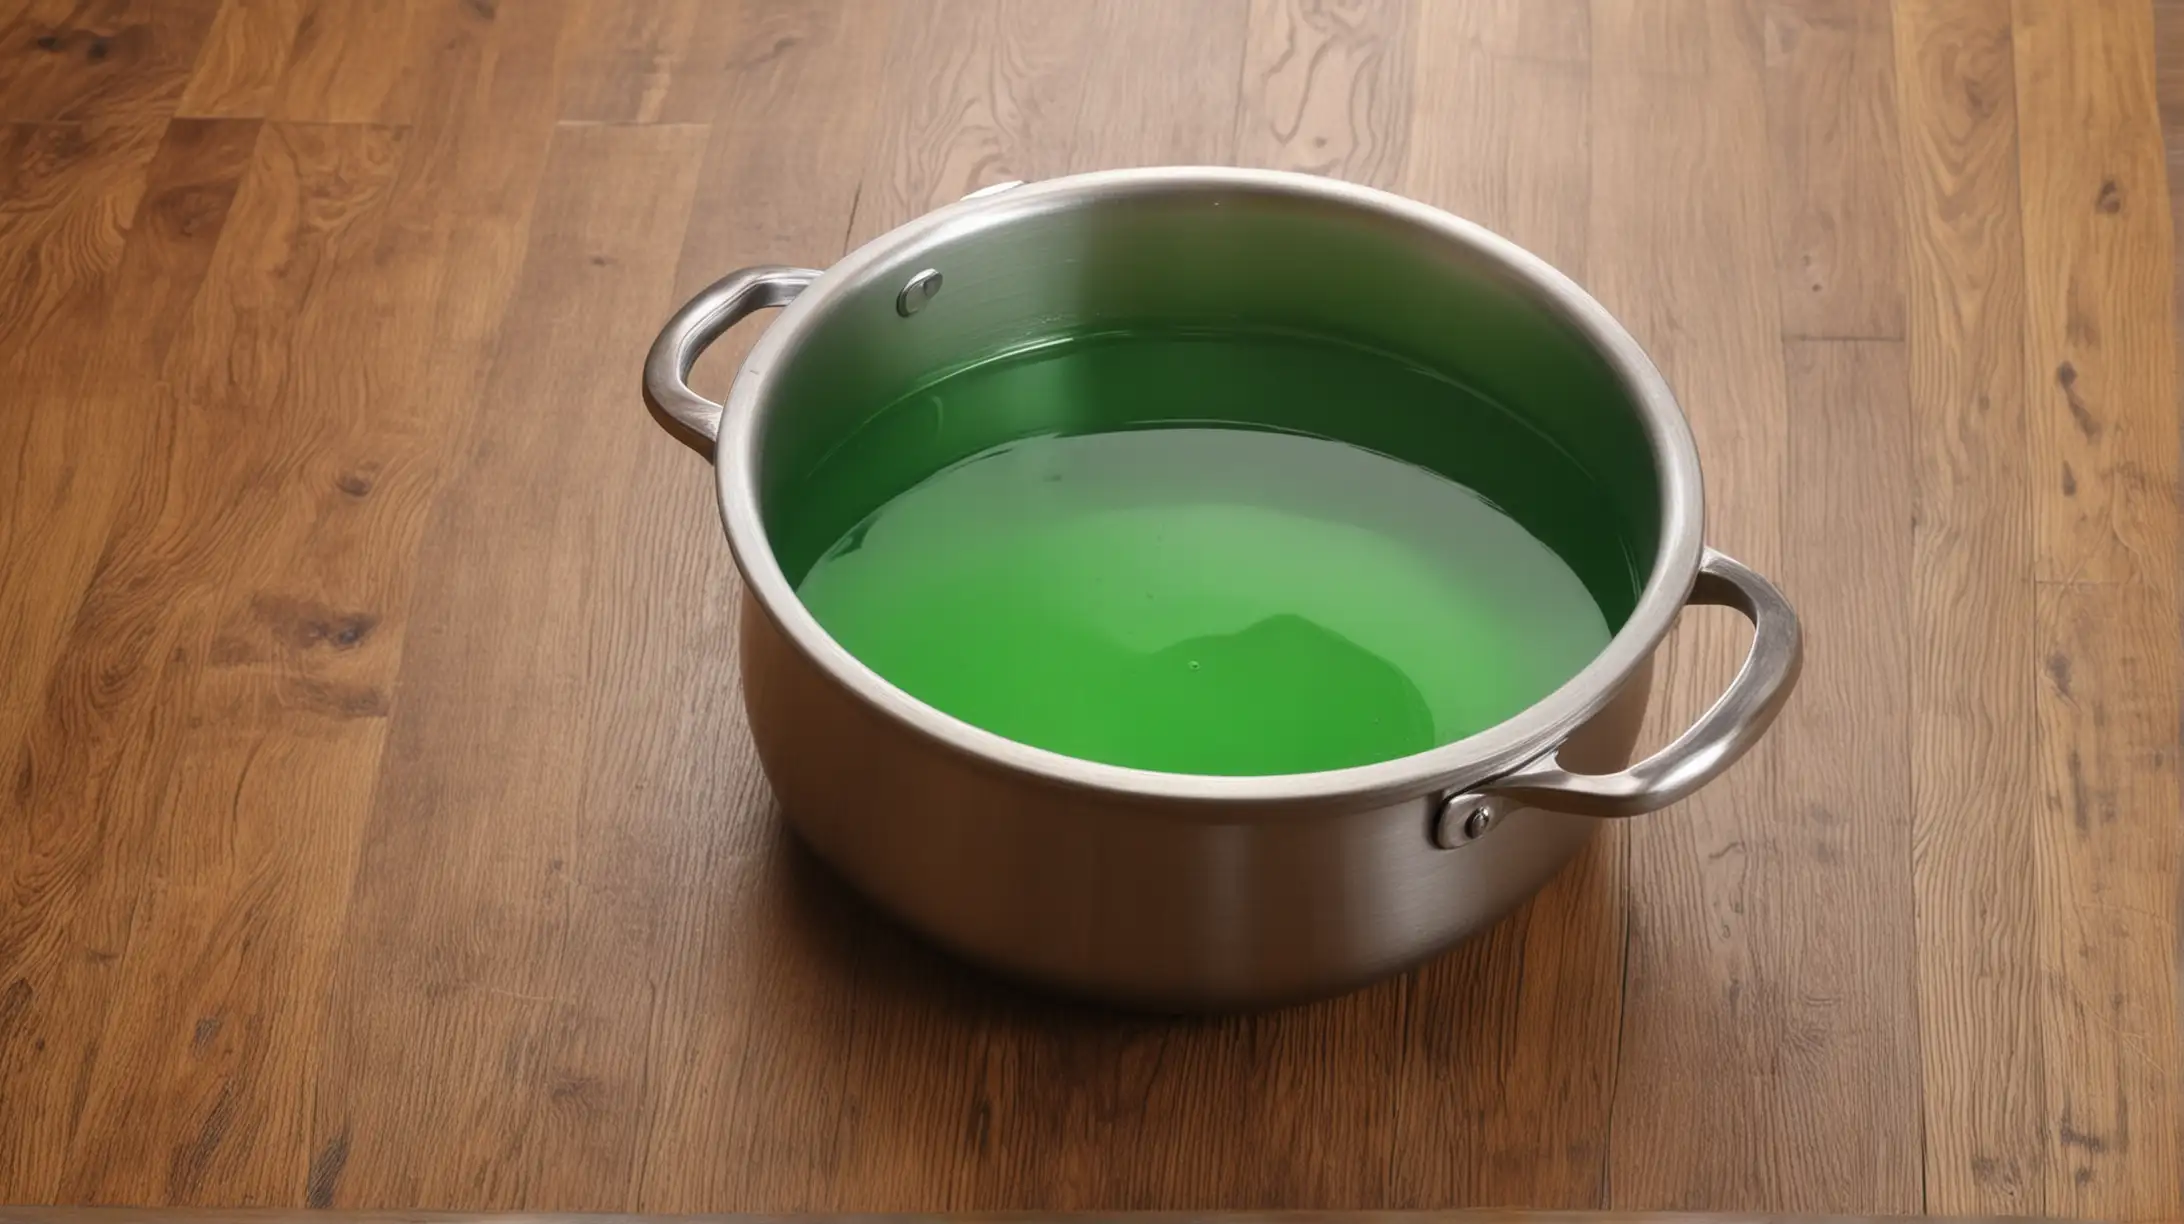 boiling pot with shiny green liquid on wood floor. Close up